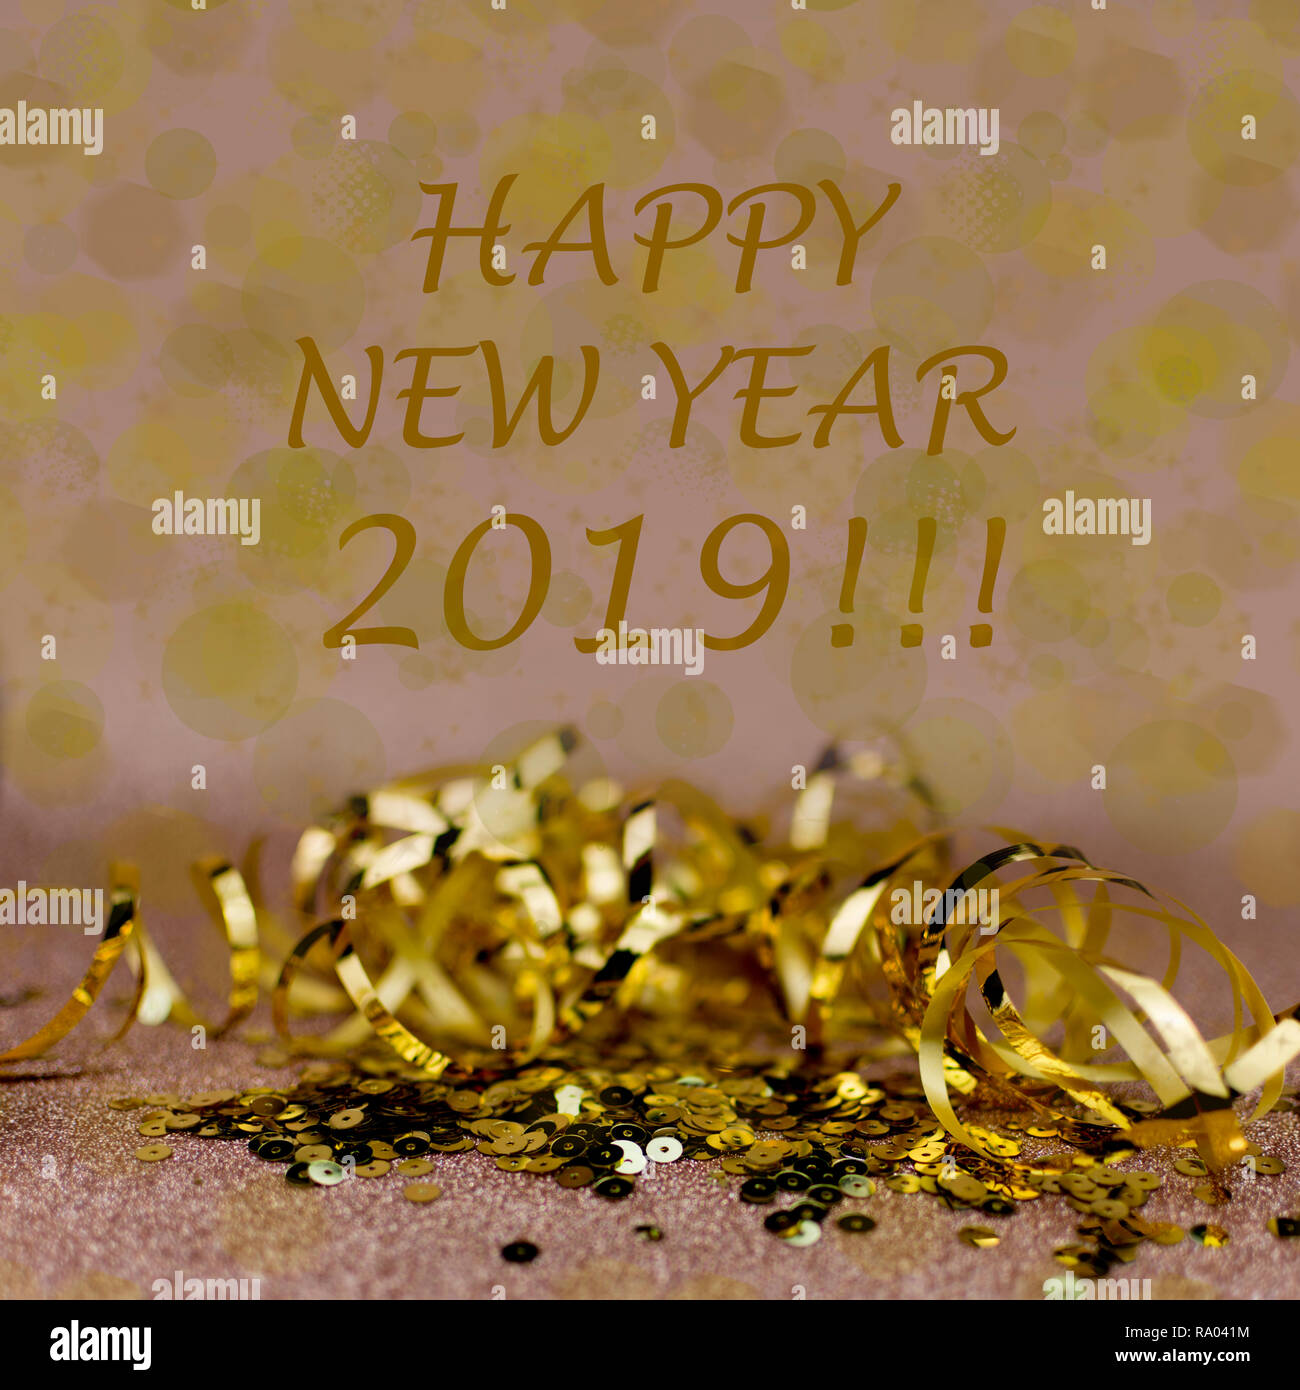 New Year 2019 greetings card. Golden ribboon and sequins on warn soft pink background. Stock Photo